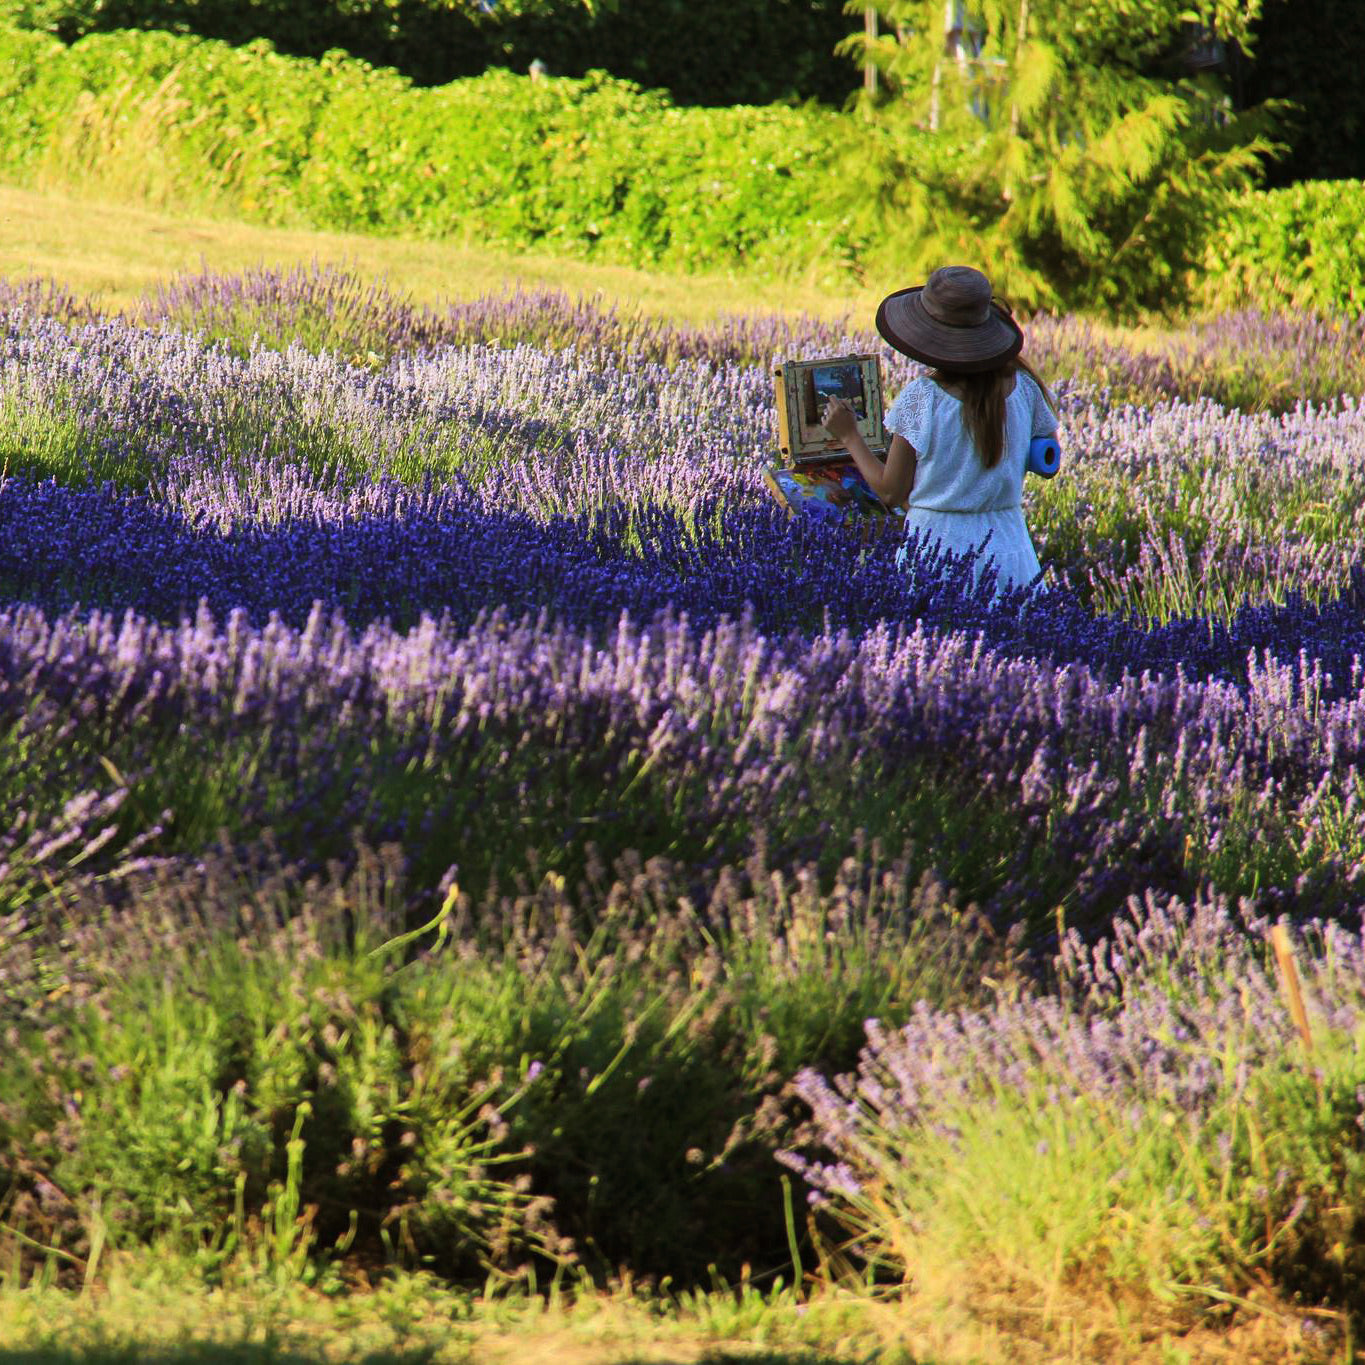 The artist, Karen Whitworth, is standing in a lavender field painting the purple rows of blooming lavender flowers.